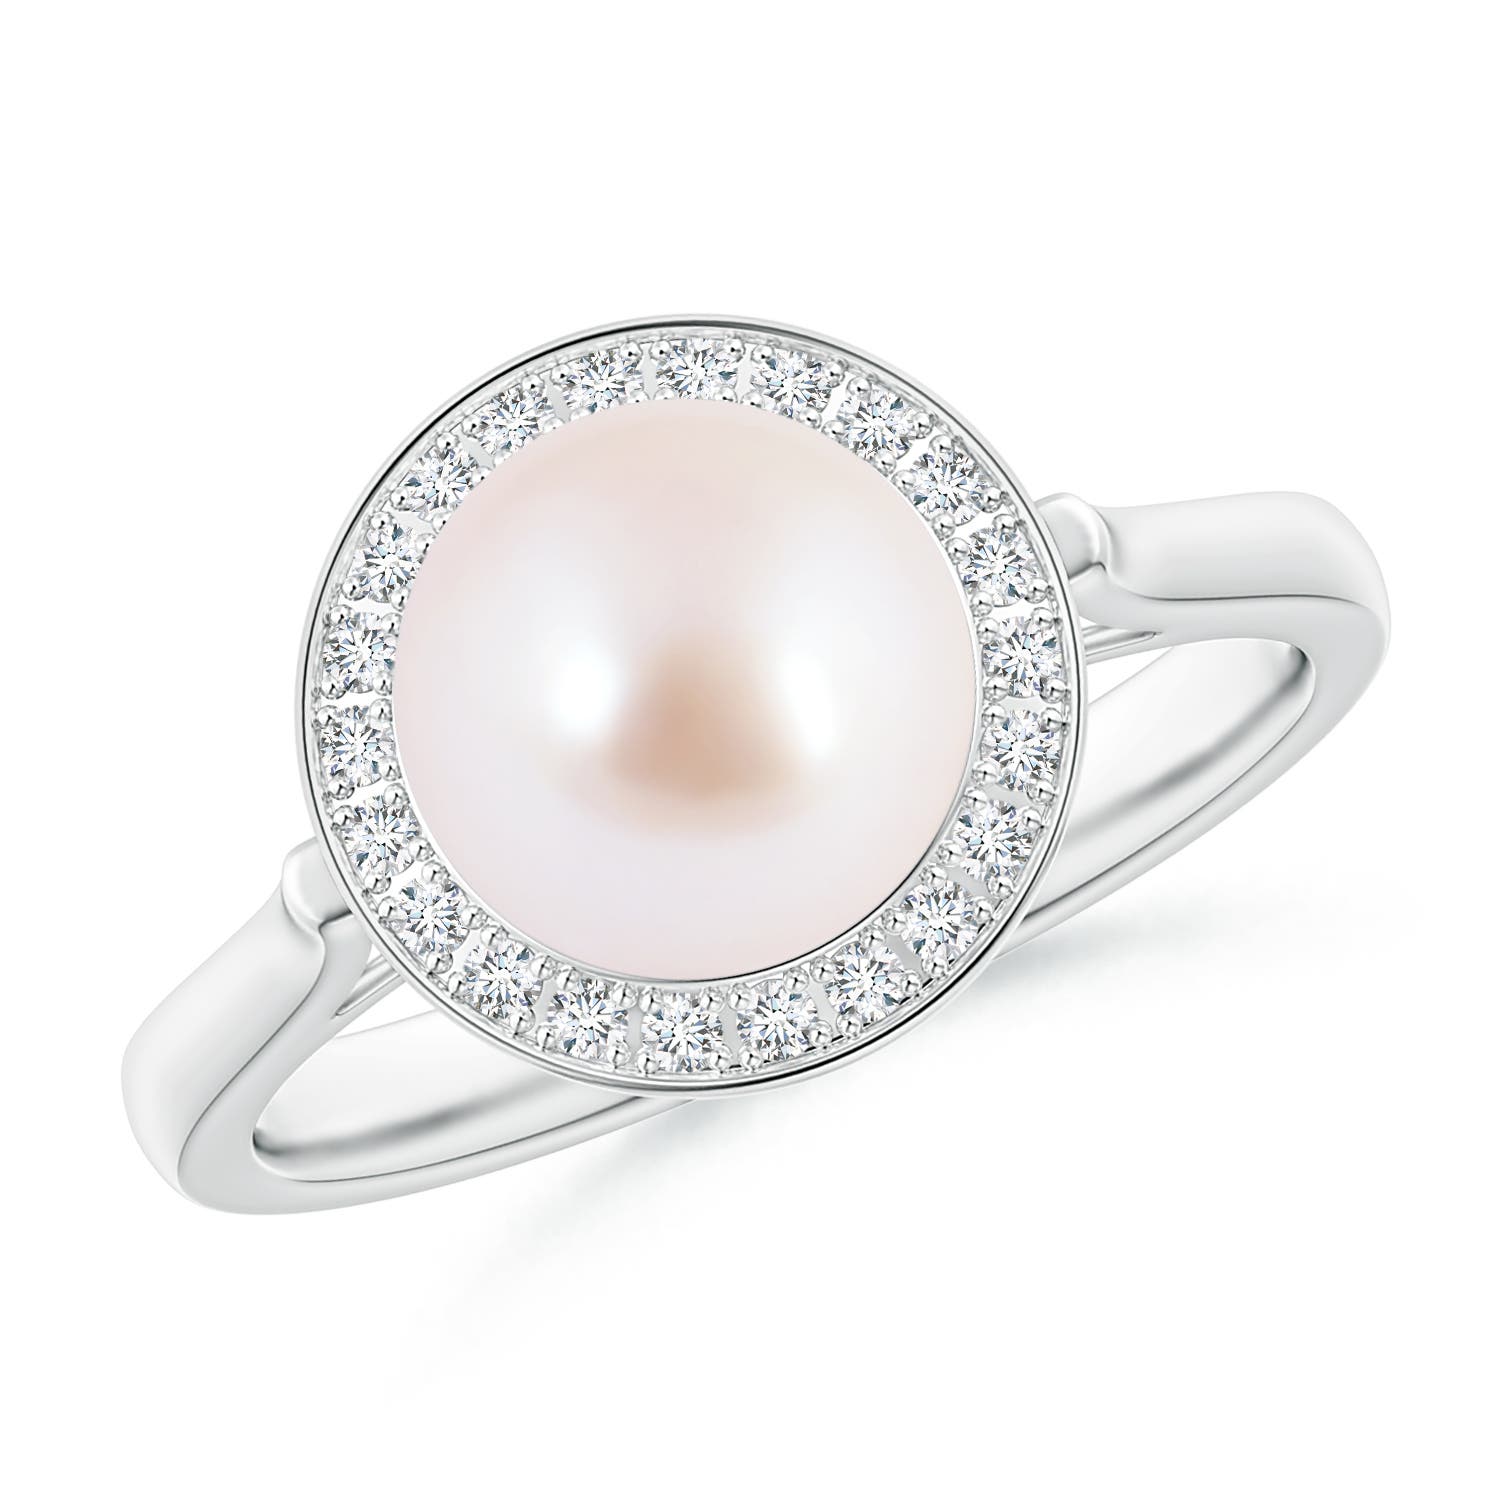 3 layer Akoya Pearl Ring with an Adjustable Chain